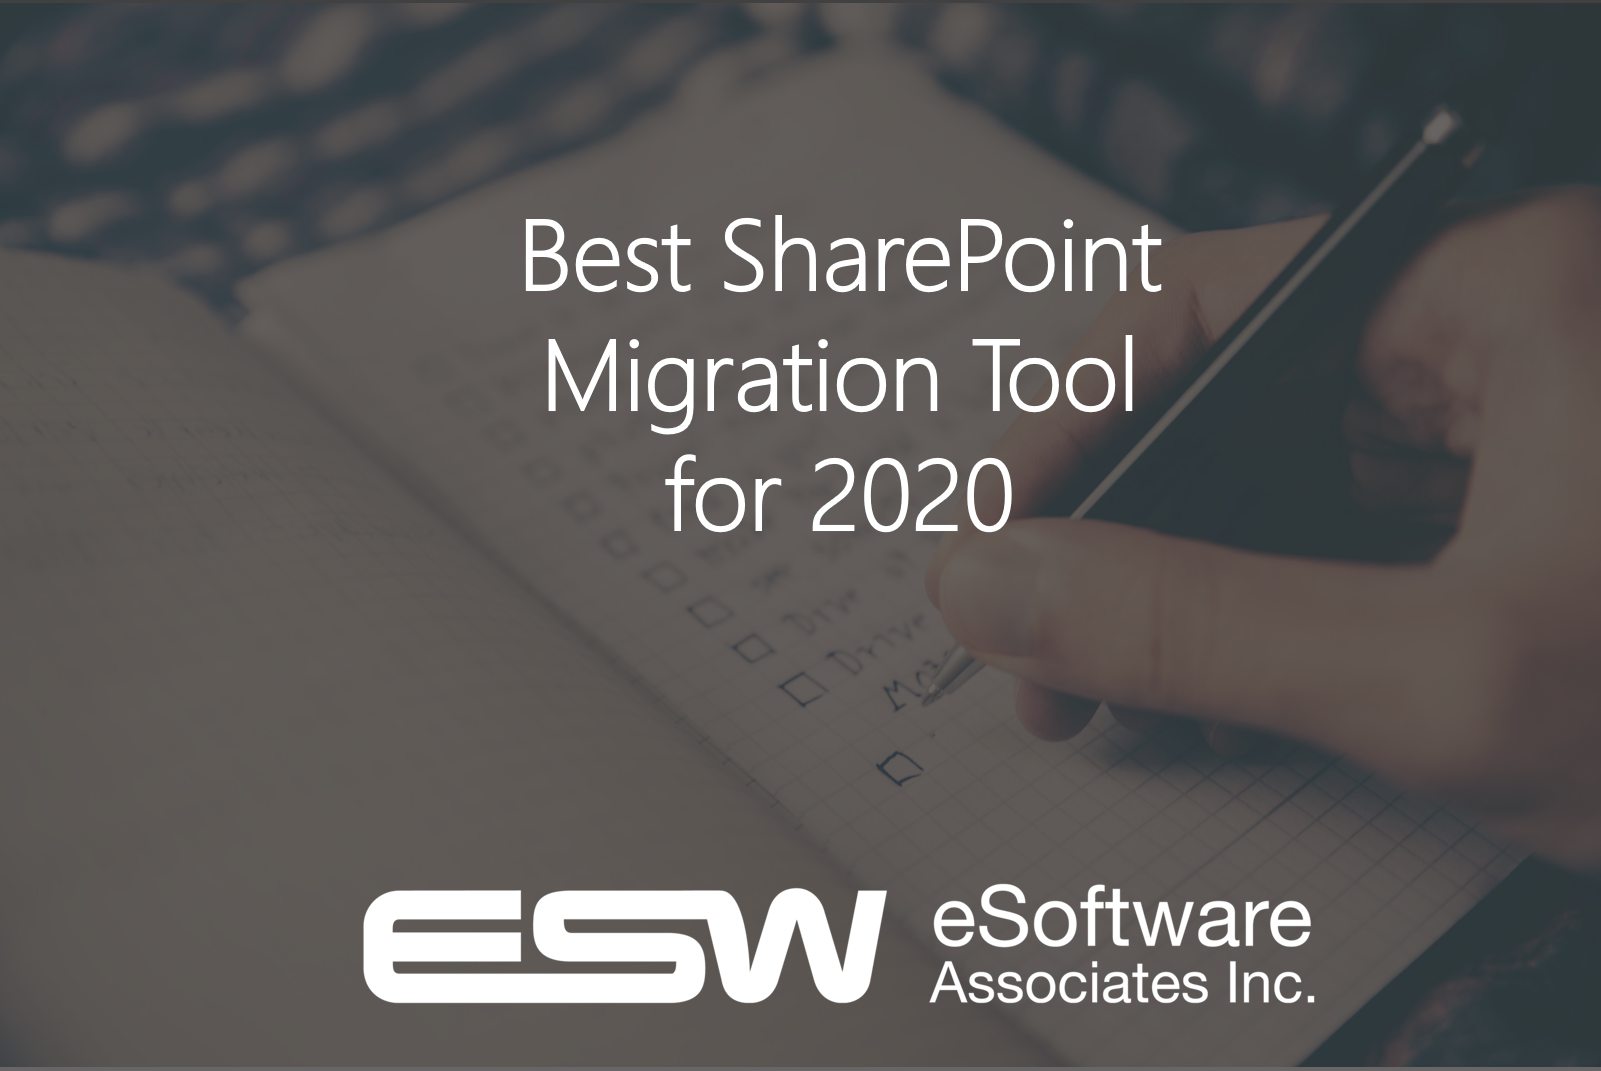 The Best SharePoint Migration Tool 2020